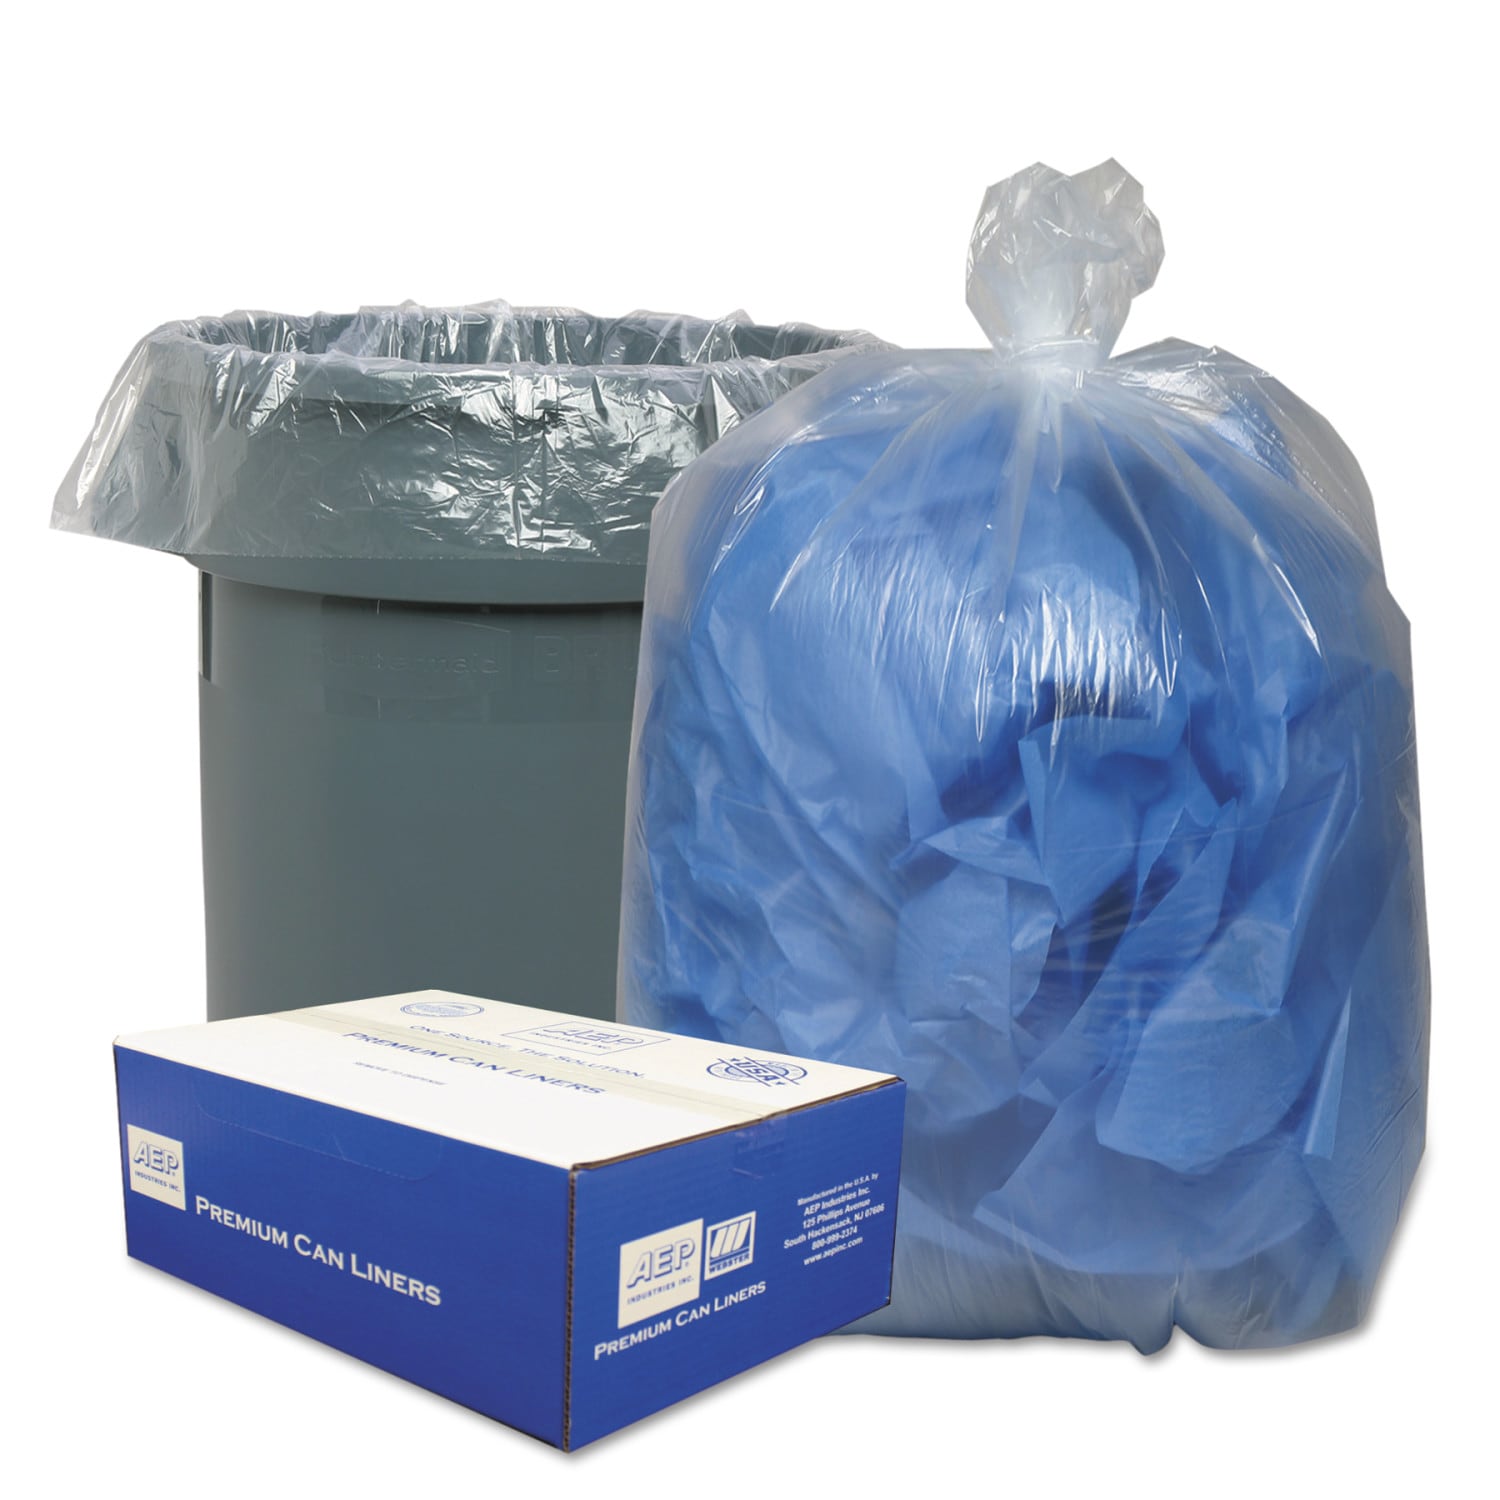 Double Sided Clear Recycling Bags - 100 Count